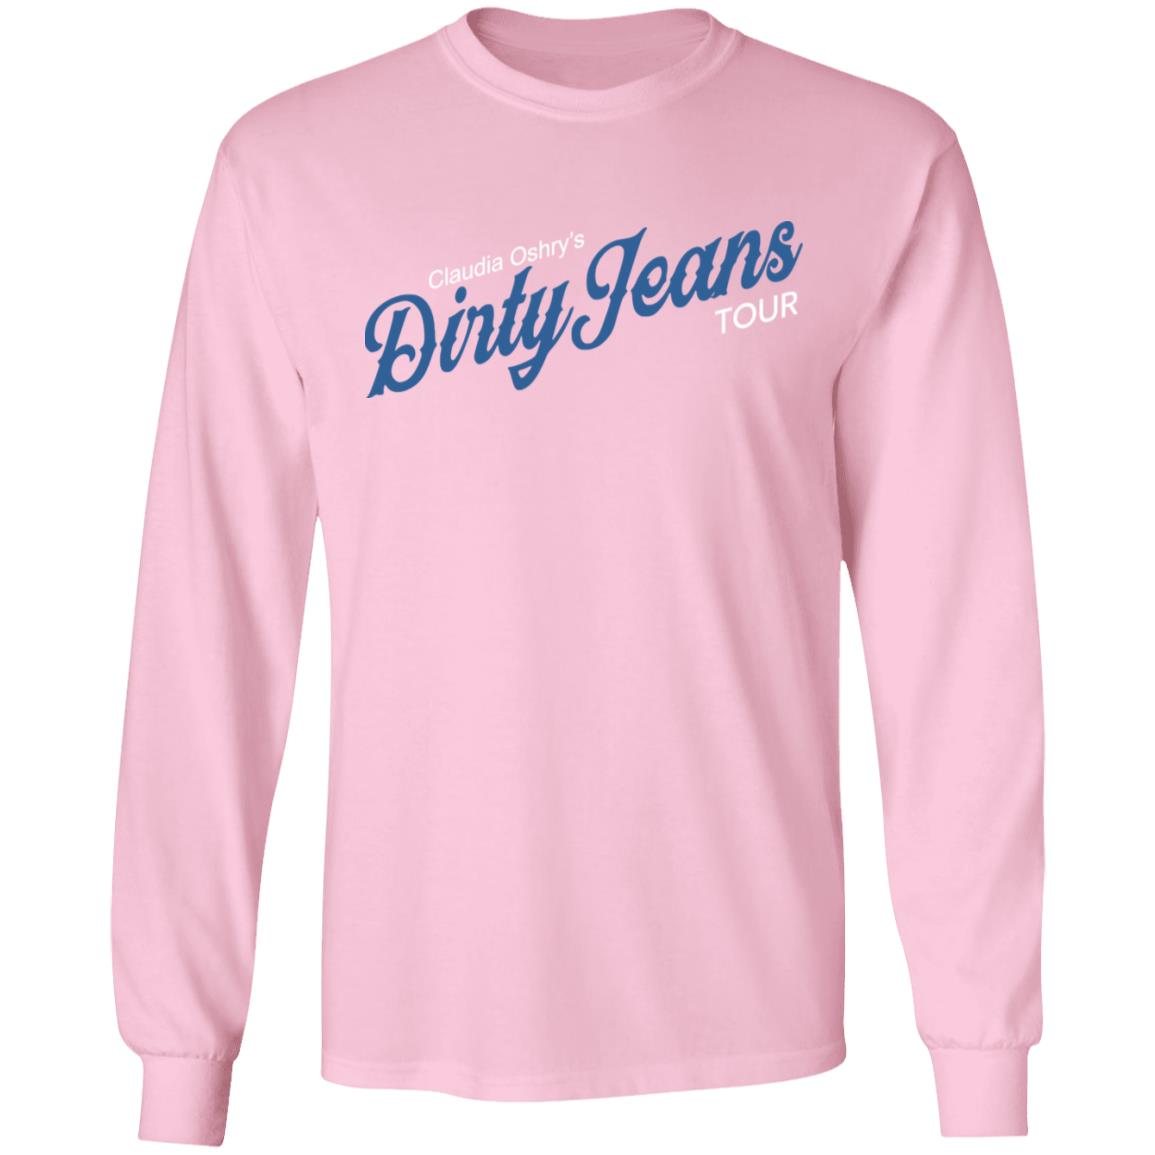 The Morning Toast Merch Pink Dirty Jeans Crewneck
#MorningToastMerch #PinkDirtyJeans #CrewneckStyle #FashionFriday #USFashionTrends #CasualChic #StreetwearVibes #TrendyThreads #AmericanStyle #FashionFavorites #PopularMerchandise #TwitterFashion

merchip8.com/product/the-mo…